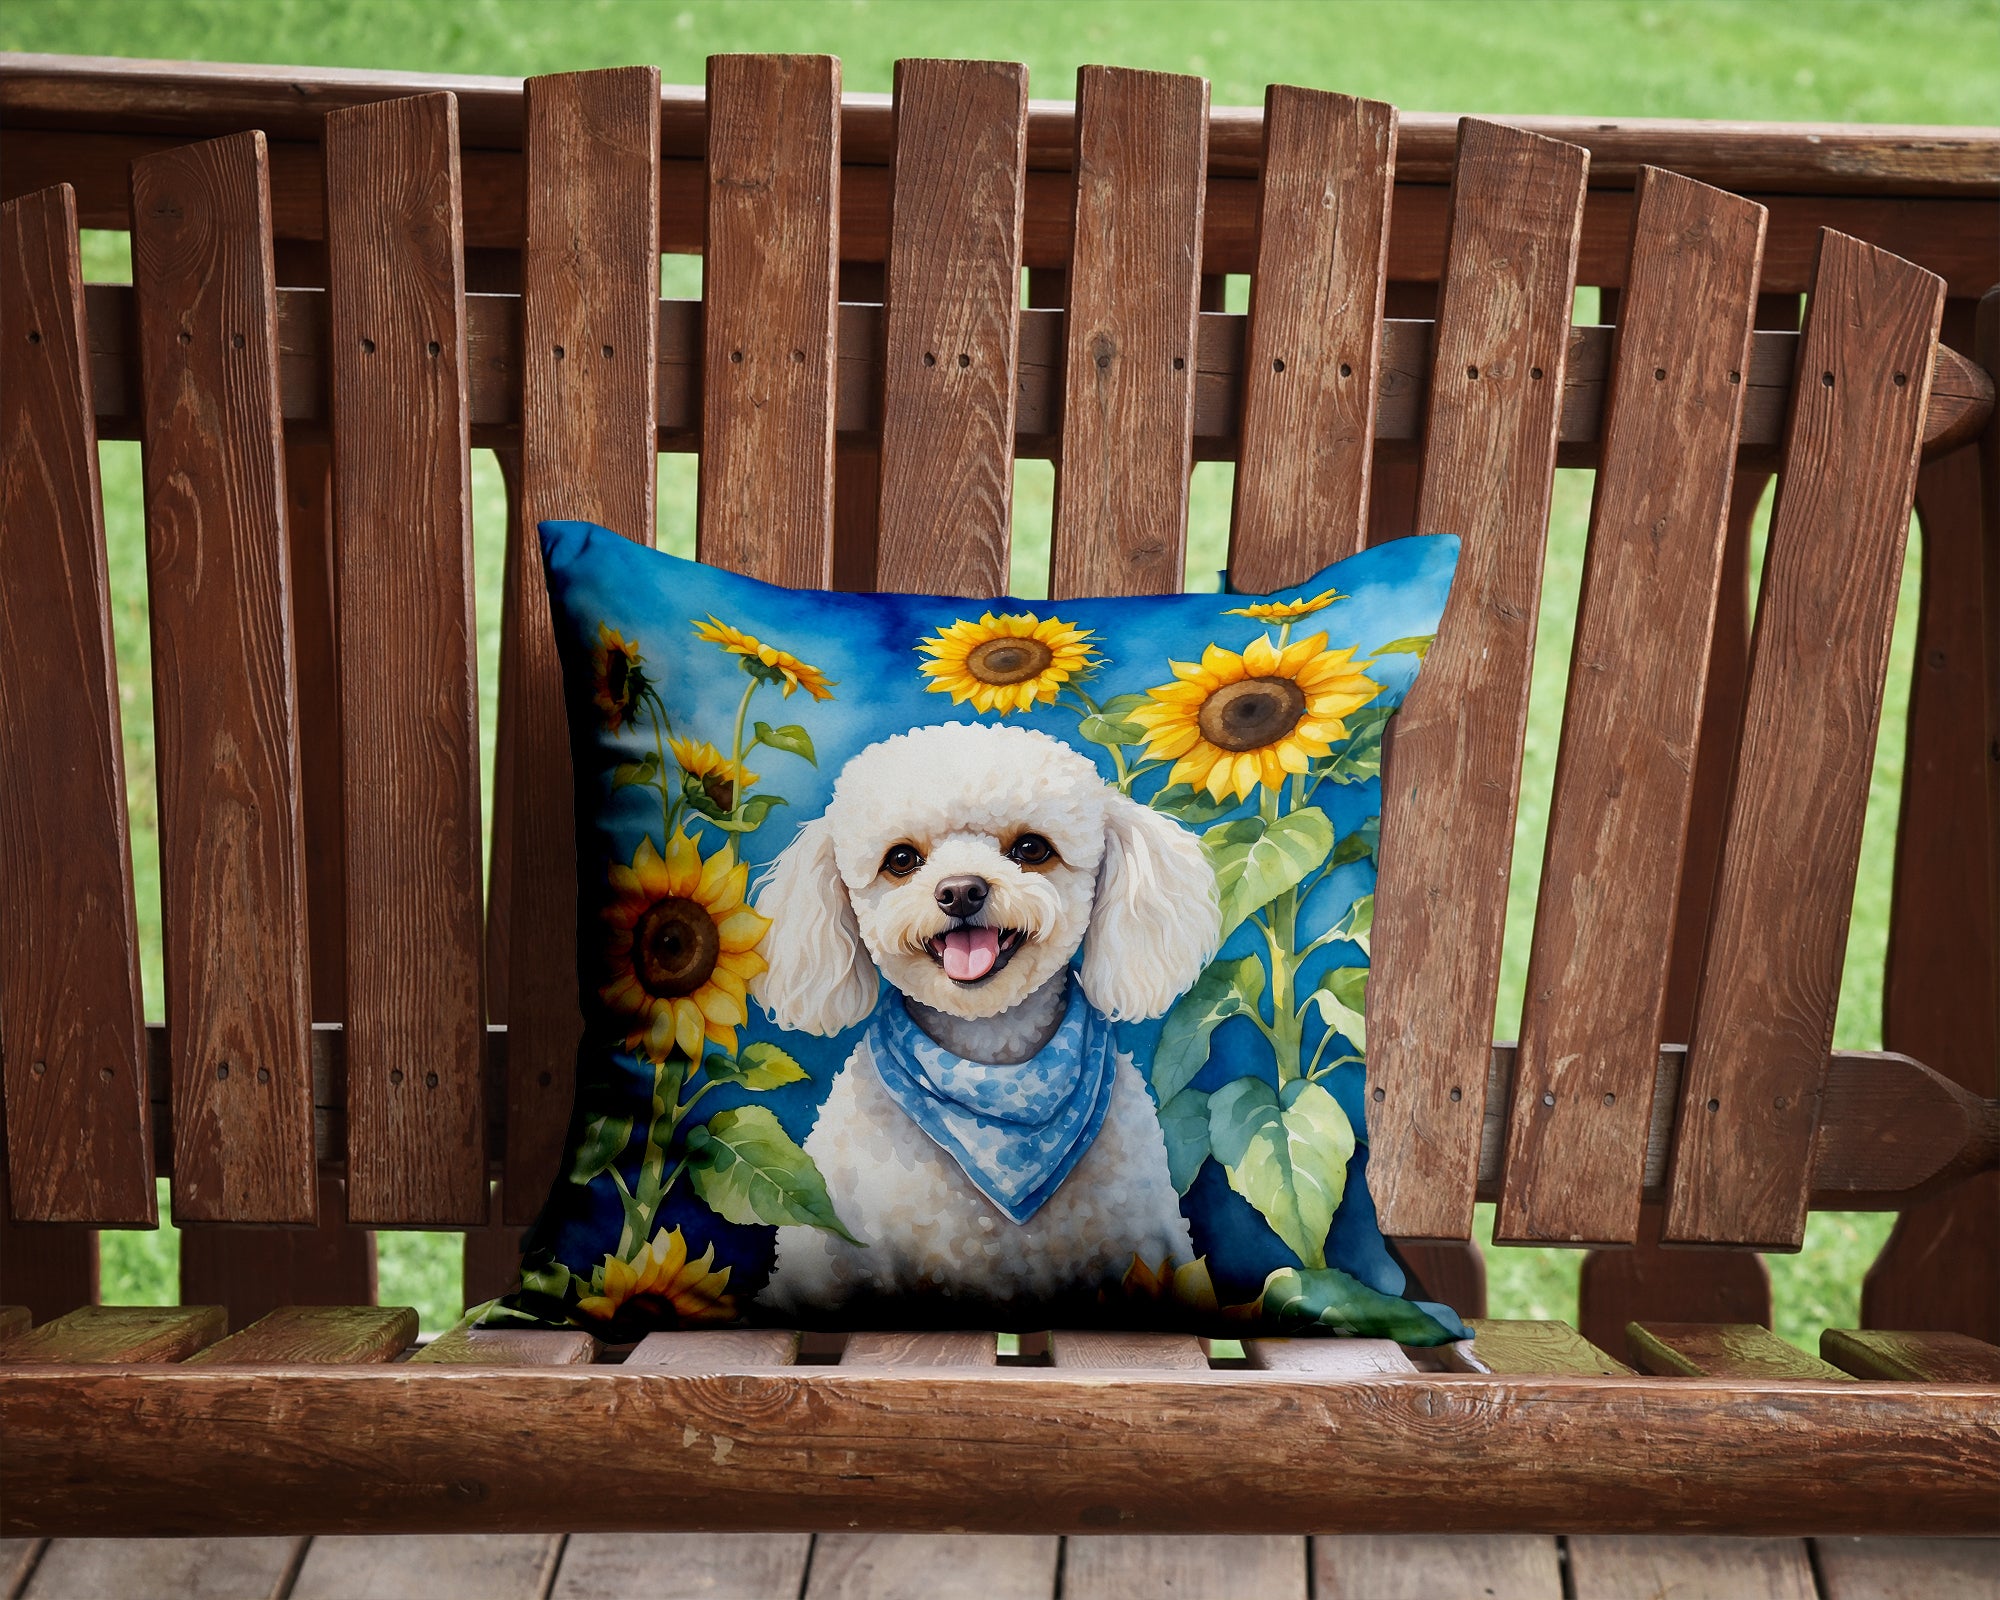 Buy this White Poodle in Sunflowers Throw Pillow